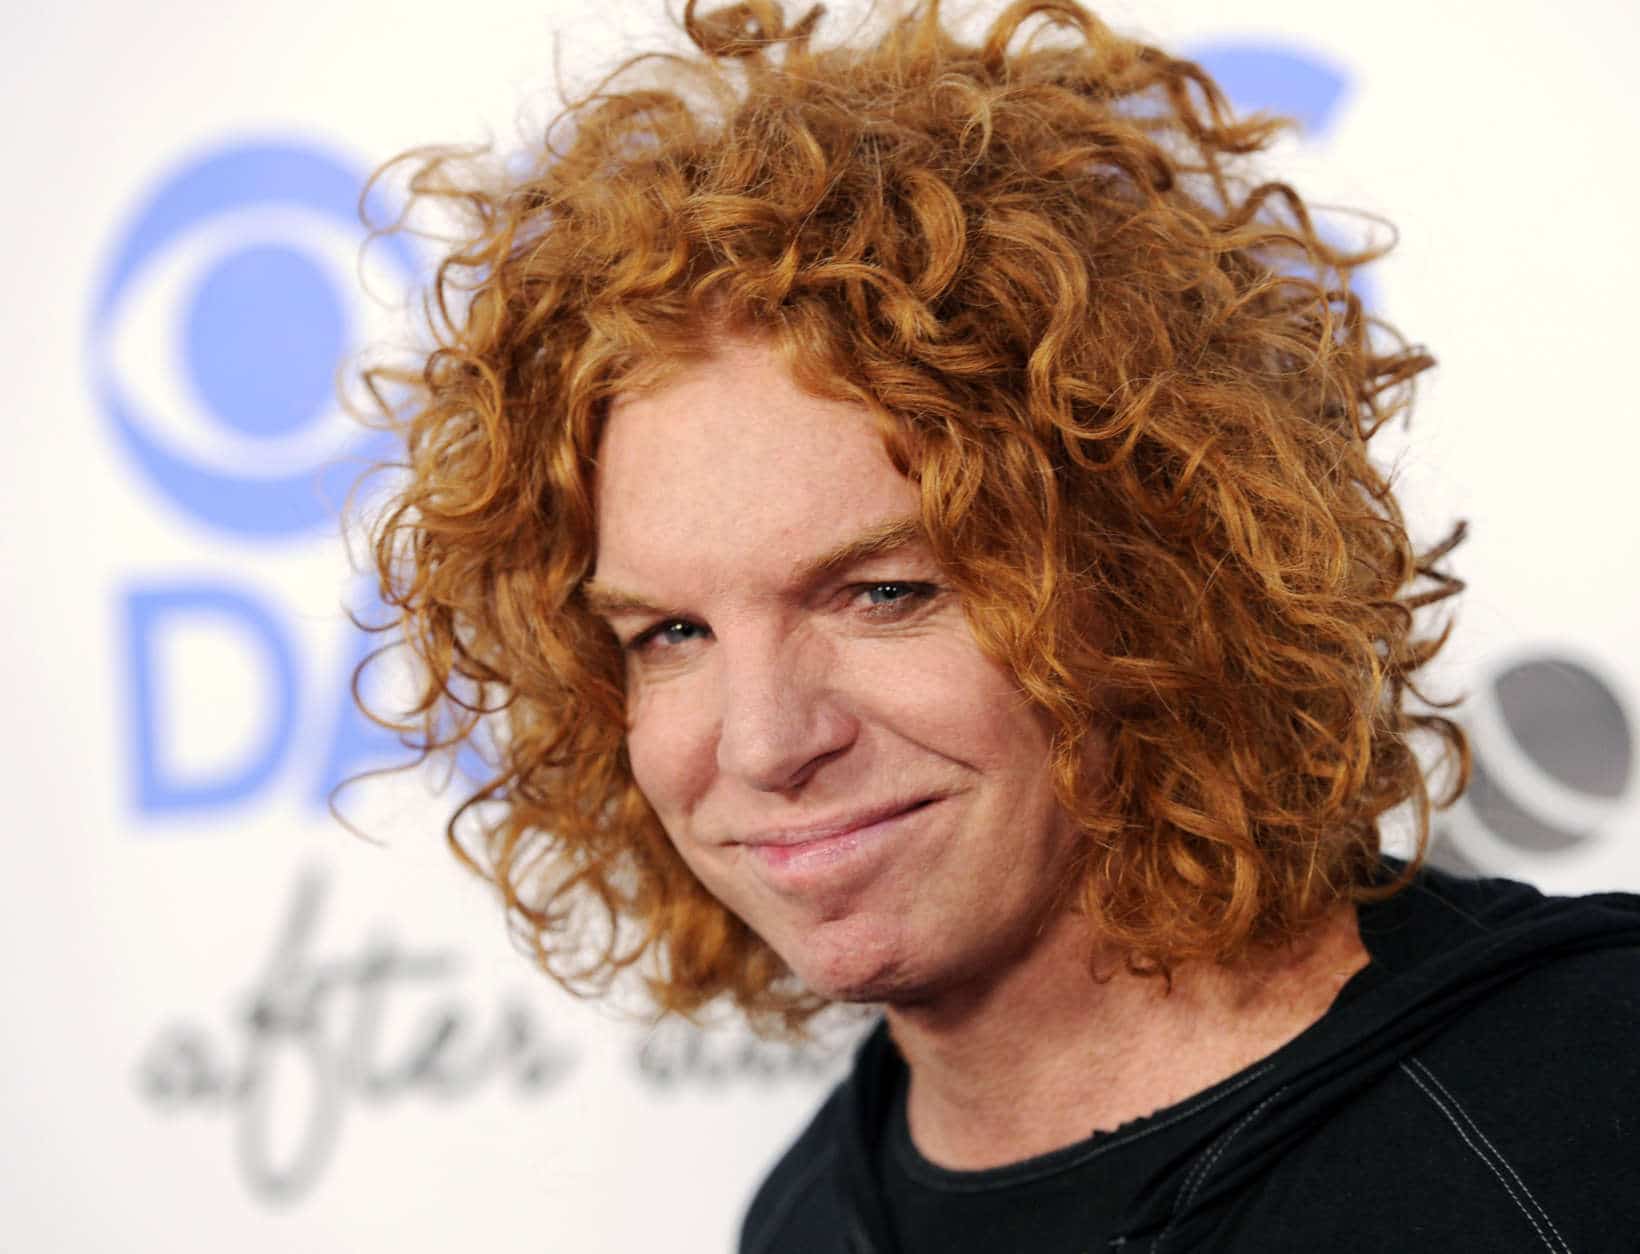 Comedian Carrot Top arrives at the CBS Daytime After Dark comedy event at The Comedy Store on Tuesday, Oct. 8, 2013 in West Hollywood, Calif. (Photo by Chris Pizzello/Invision/AP)